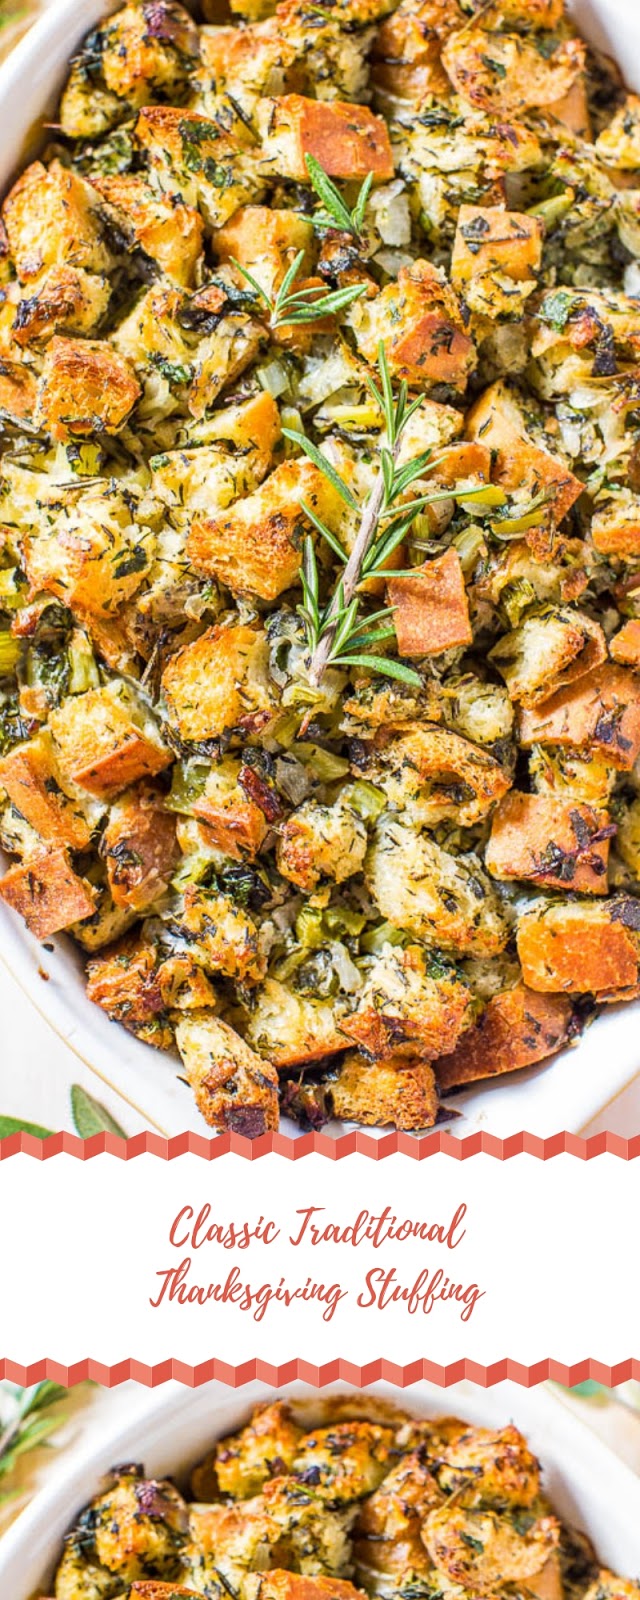 Classic Traditional Thanksgiving Stuffing #Christmas #Food - Genius ...